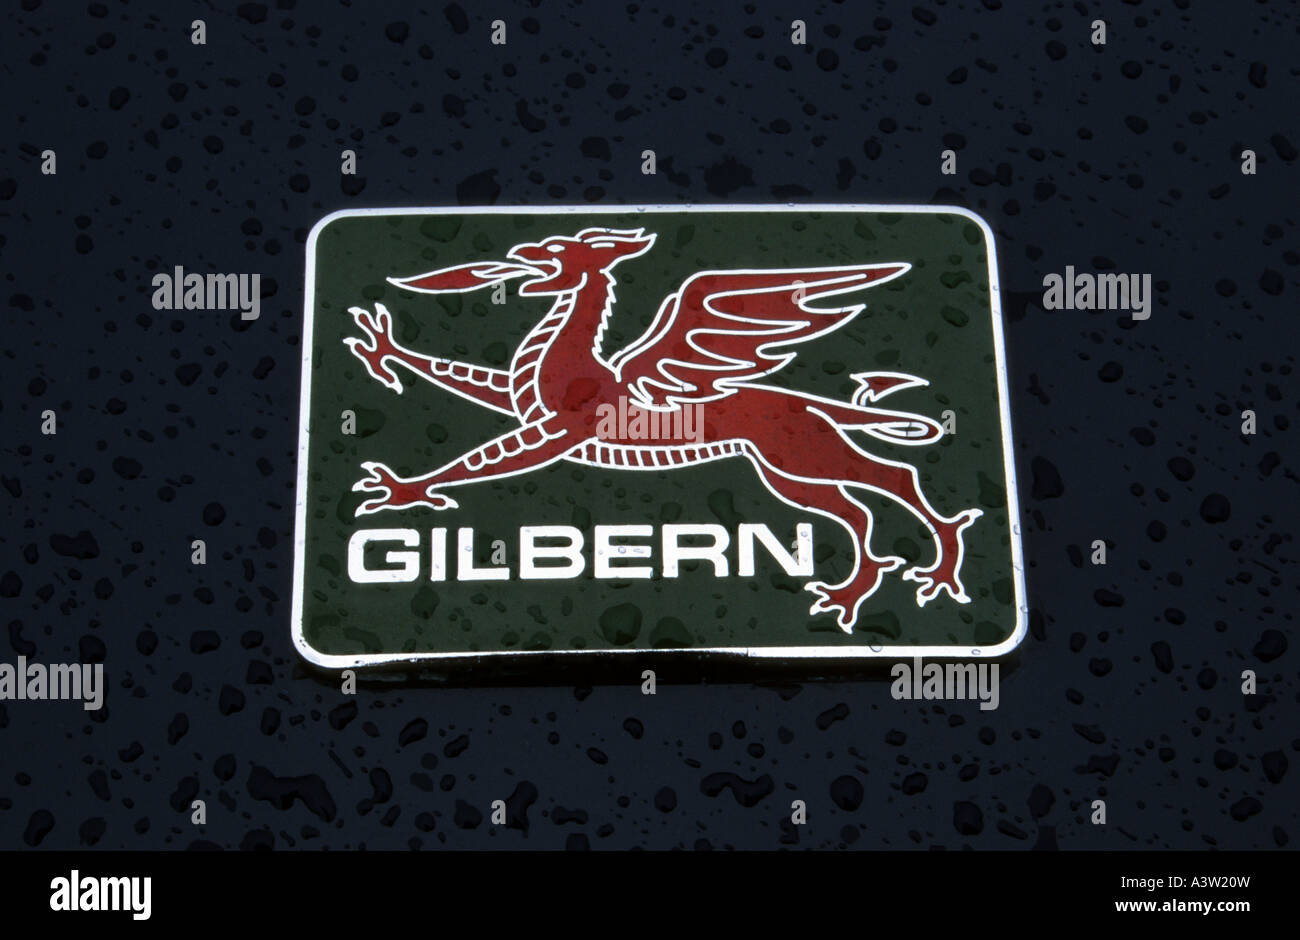 Gilbern. Welsh car manufacturer 1959 to 1974 Stock Photo